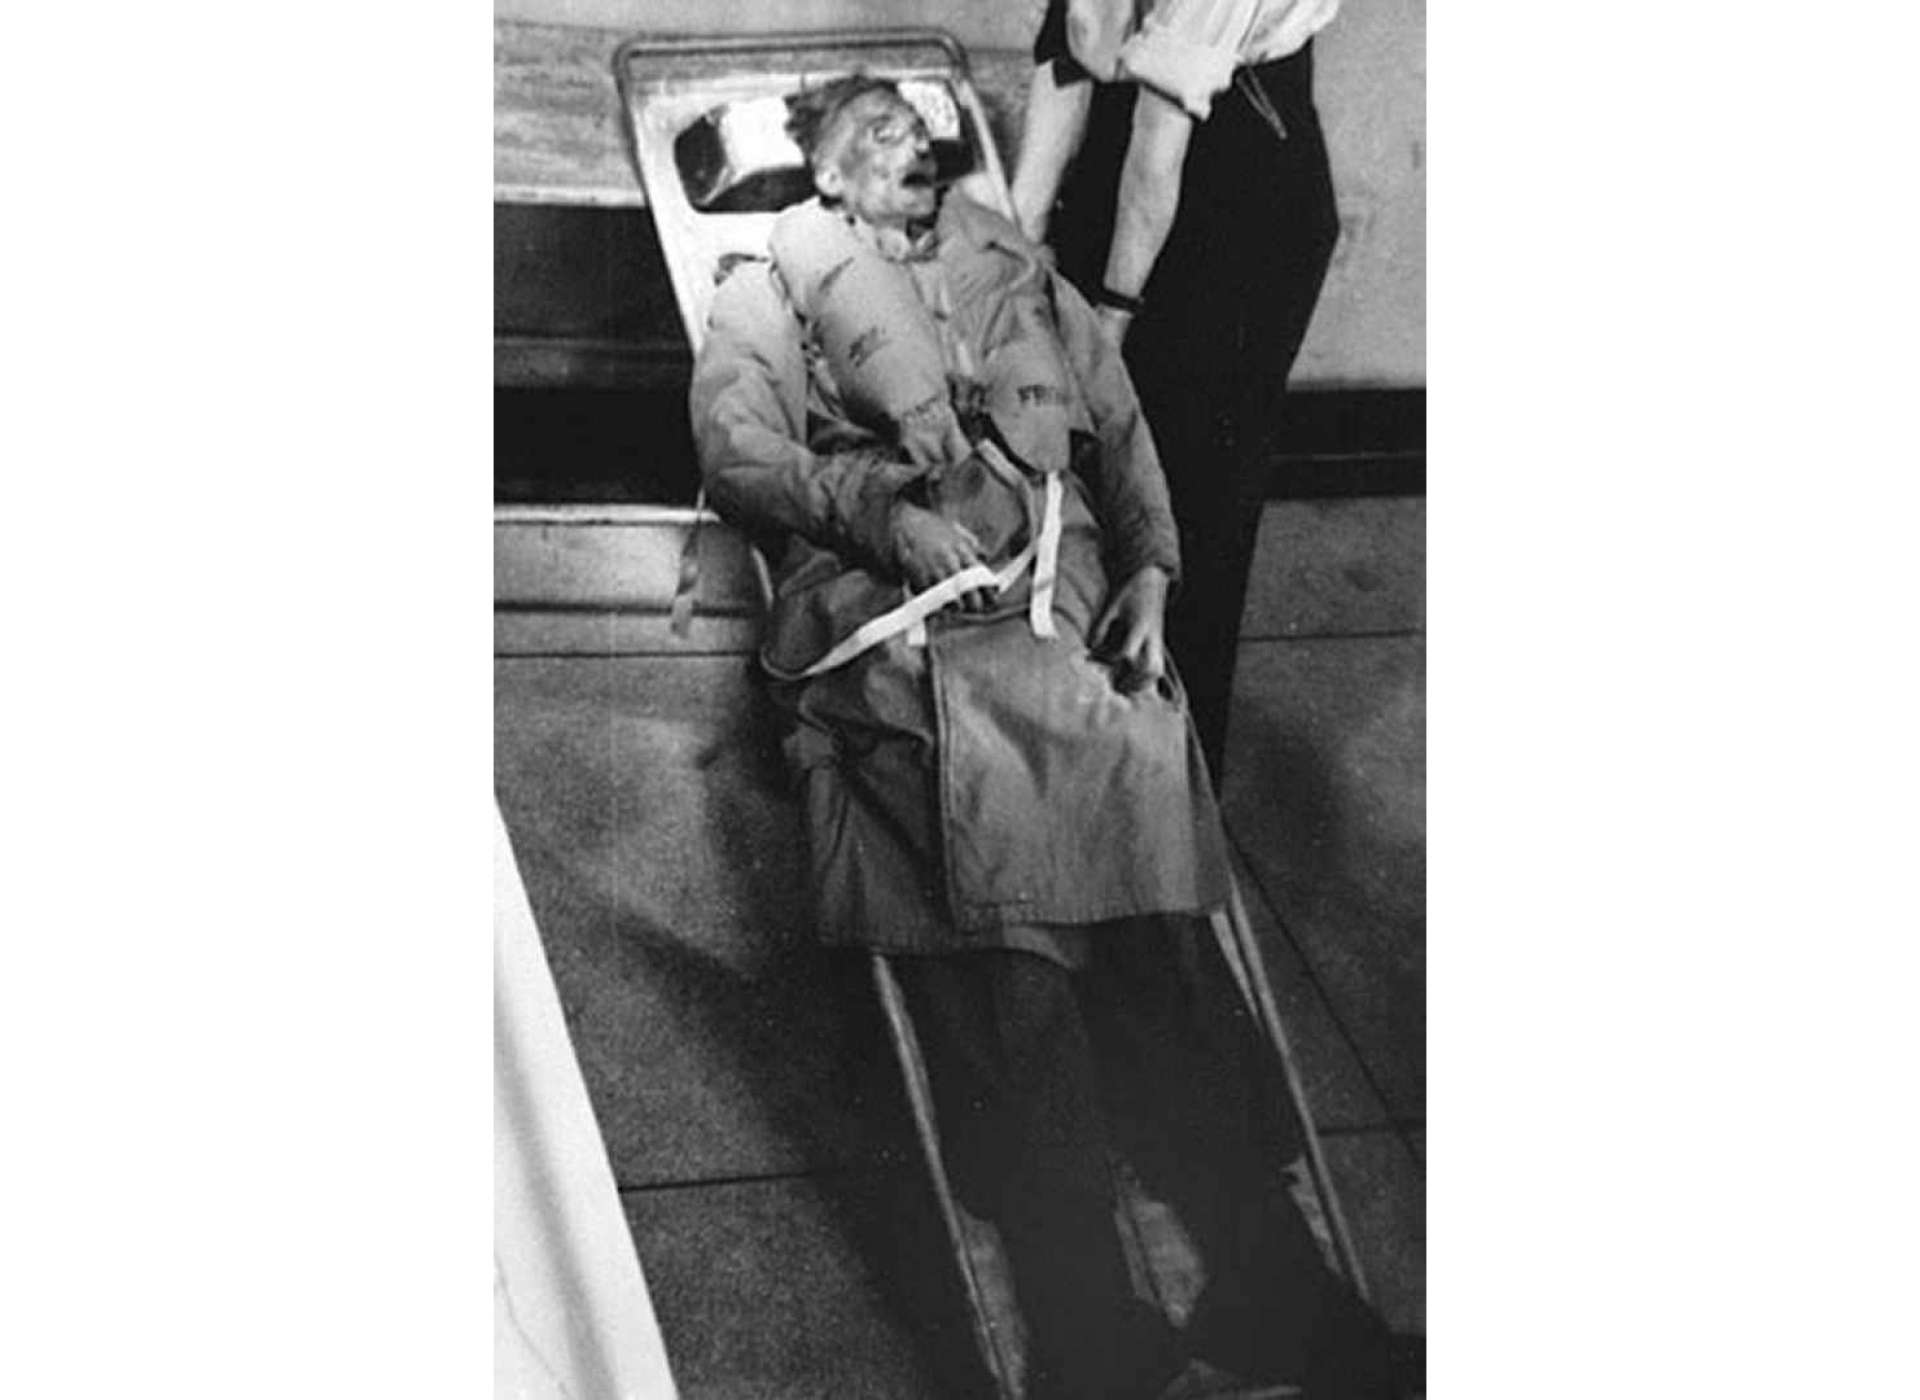 The corpse of Glyndwr Michael, dressed as Martin, just prior to placement in the canister